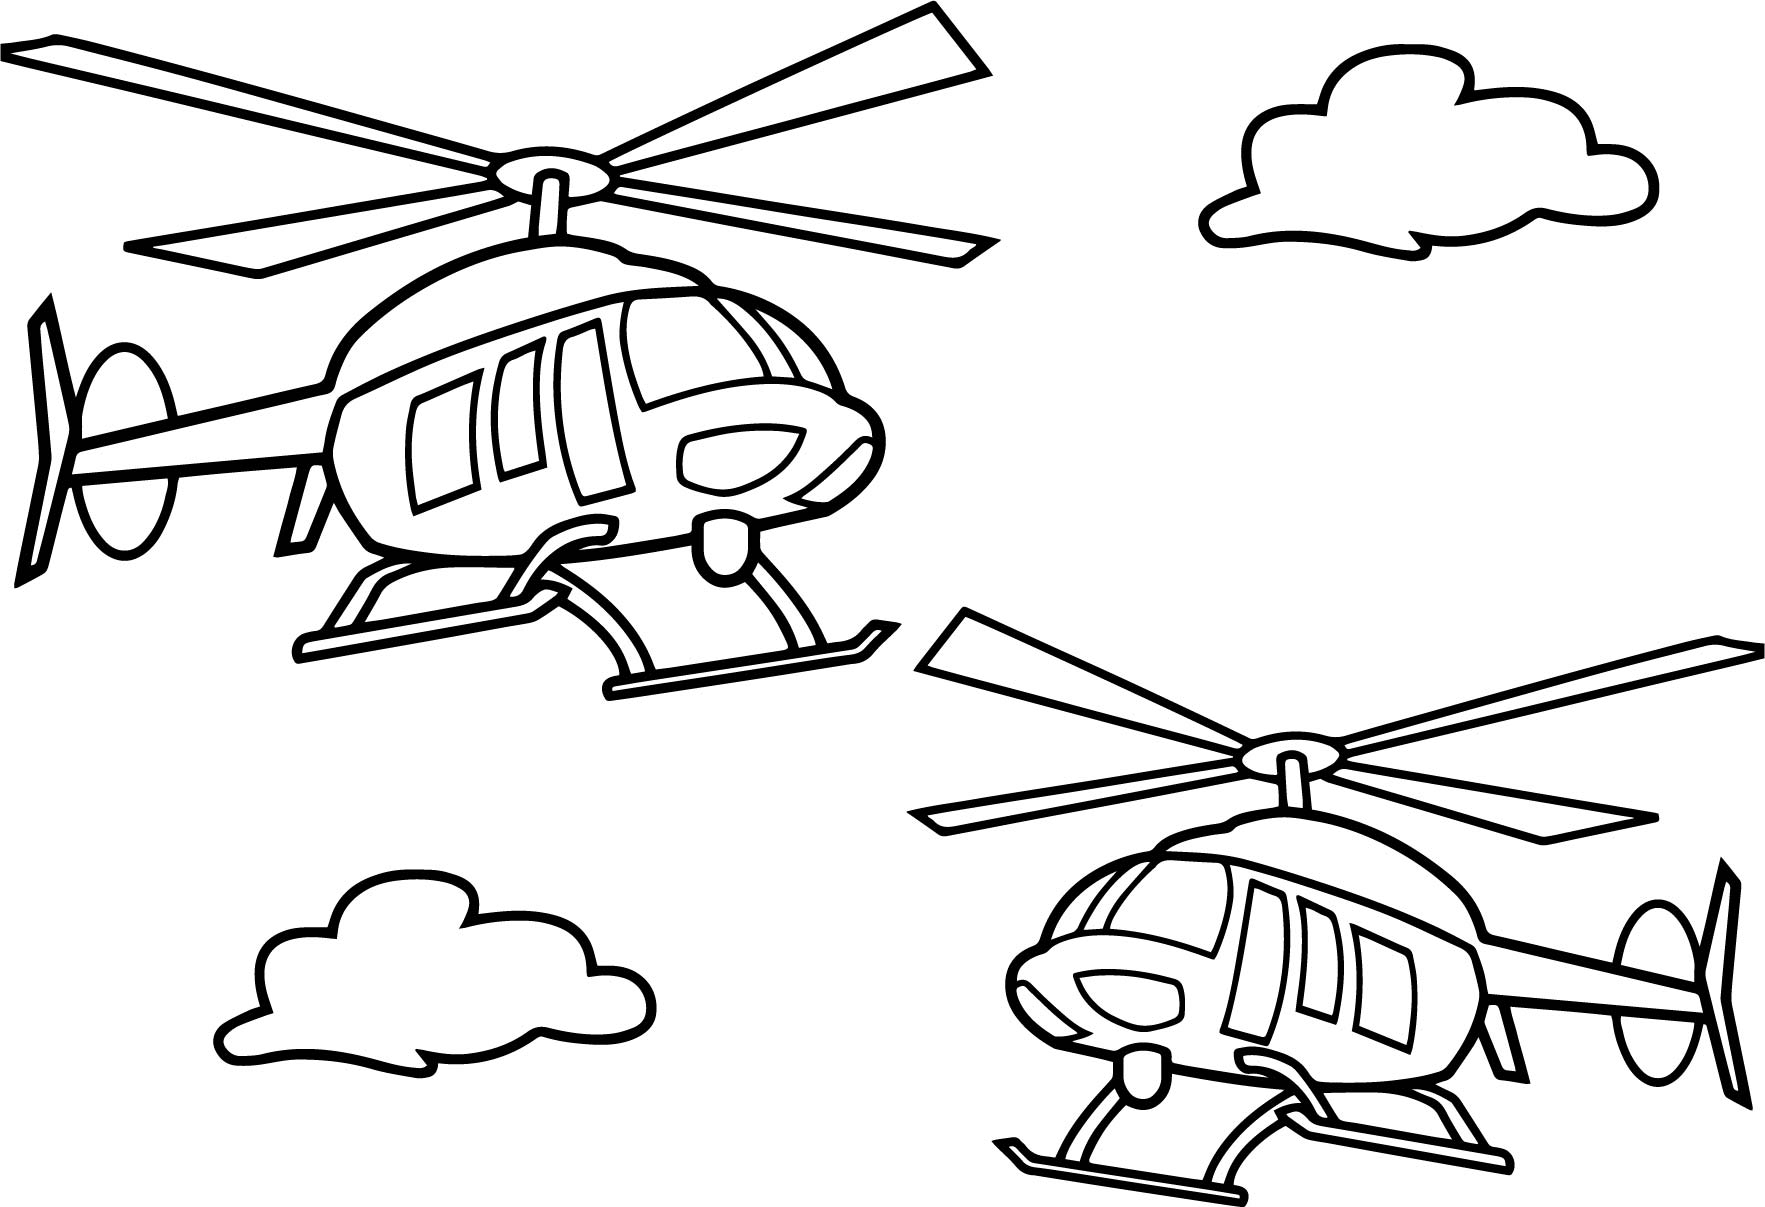 helicopter-line-drawing-at-getdrawings-free-download